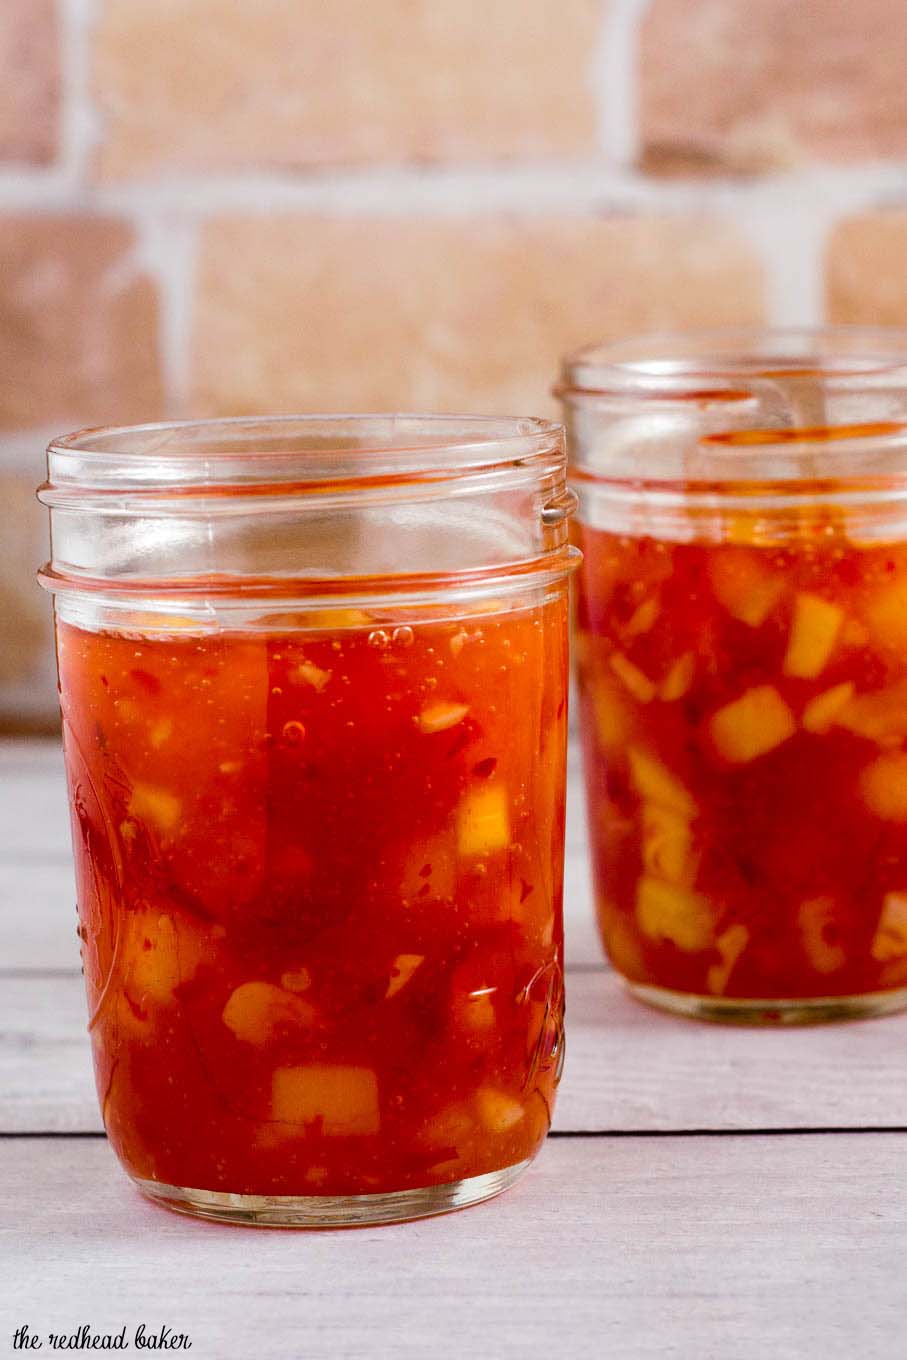 This sticky, sweet mango chili sauce is easy to make and so addictive! Use it to dip shrimp, chicken or fresh spring rolls. 